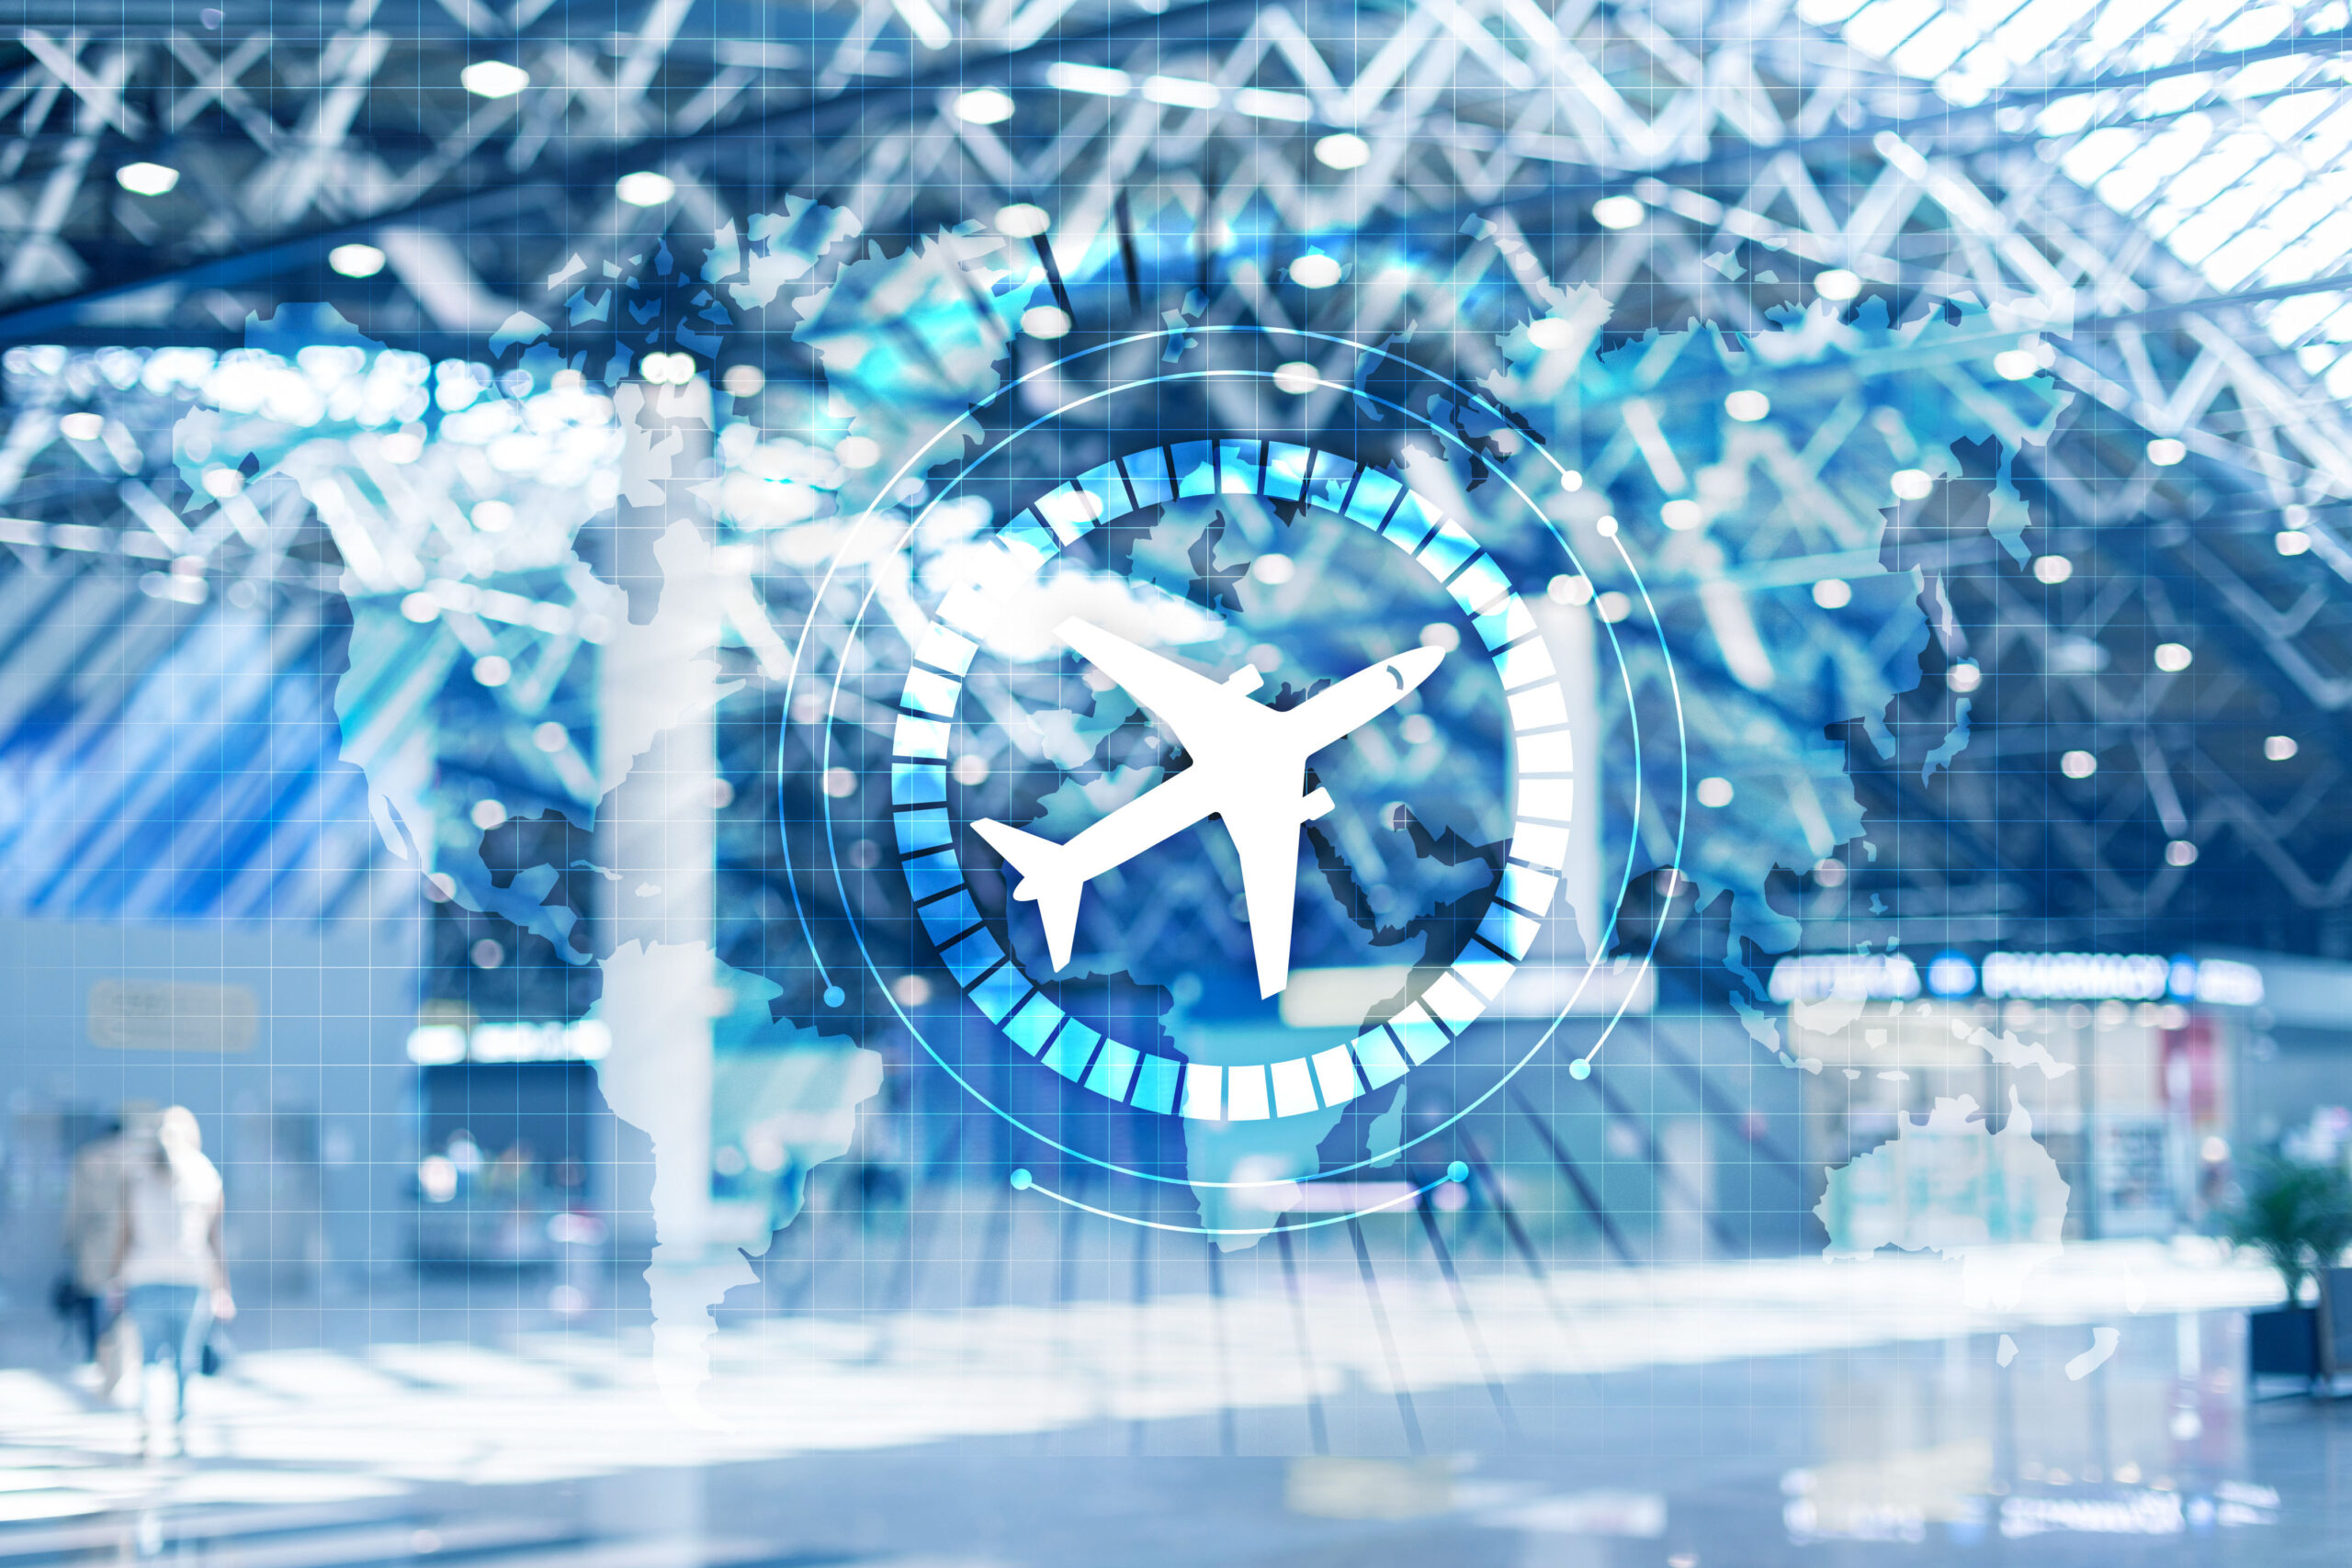 Airplane icon on virtual screen. Airplane transportation route network concept. Business Travel Background